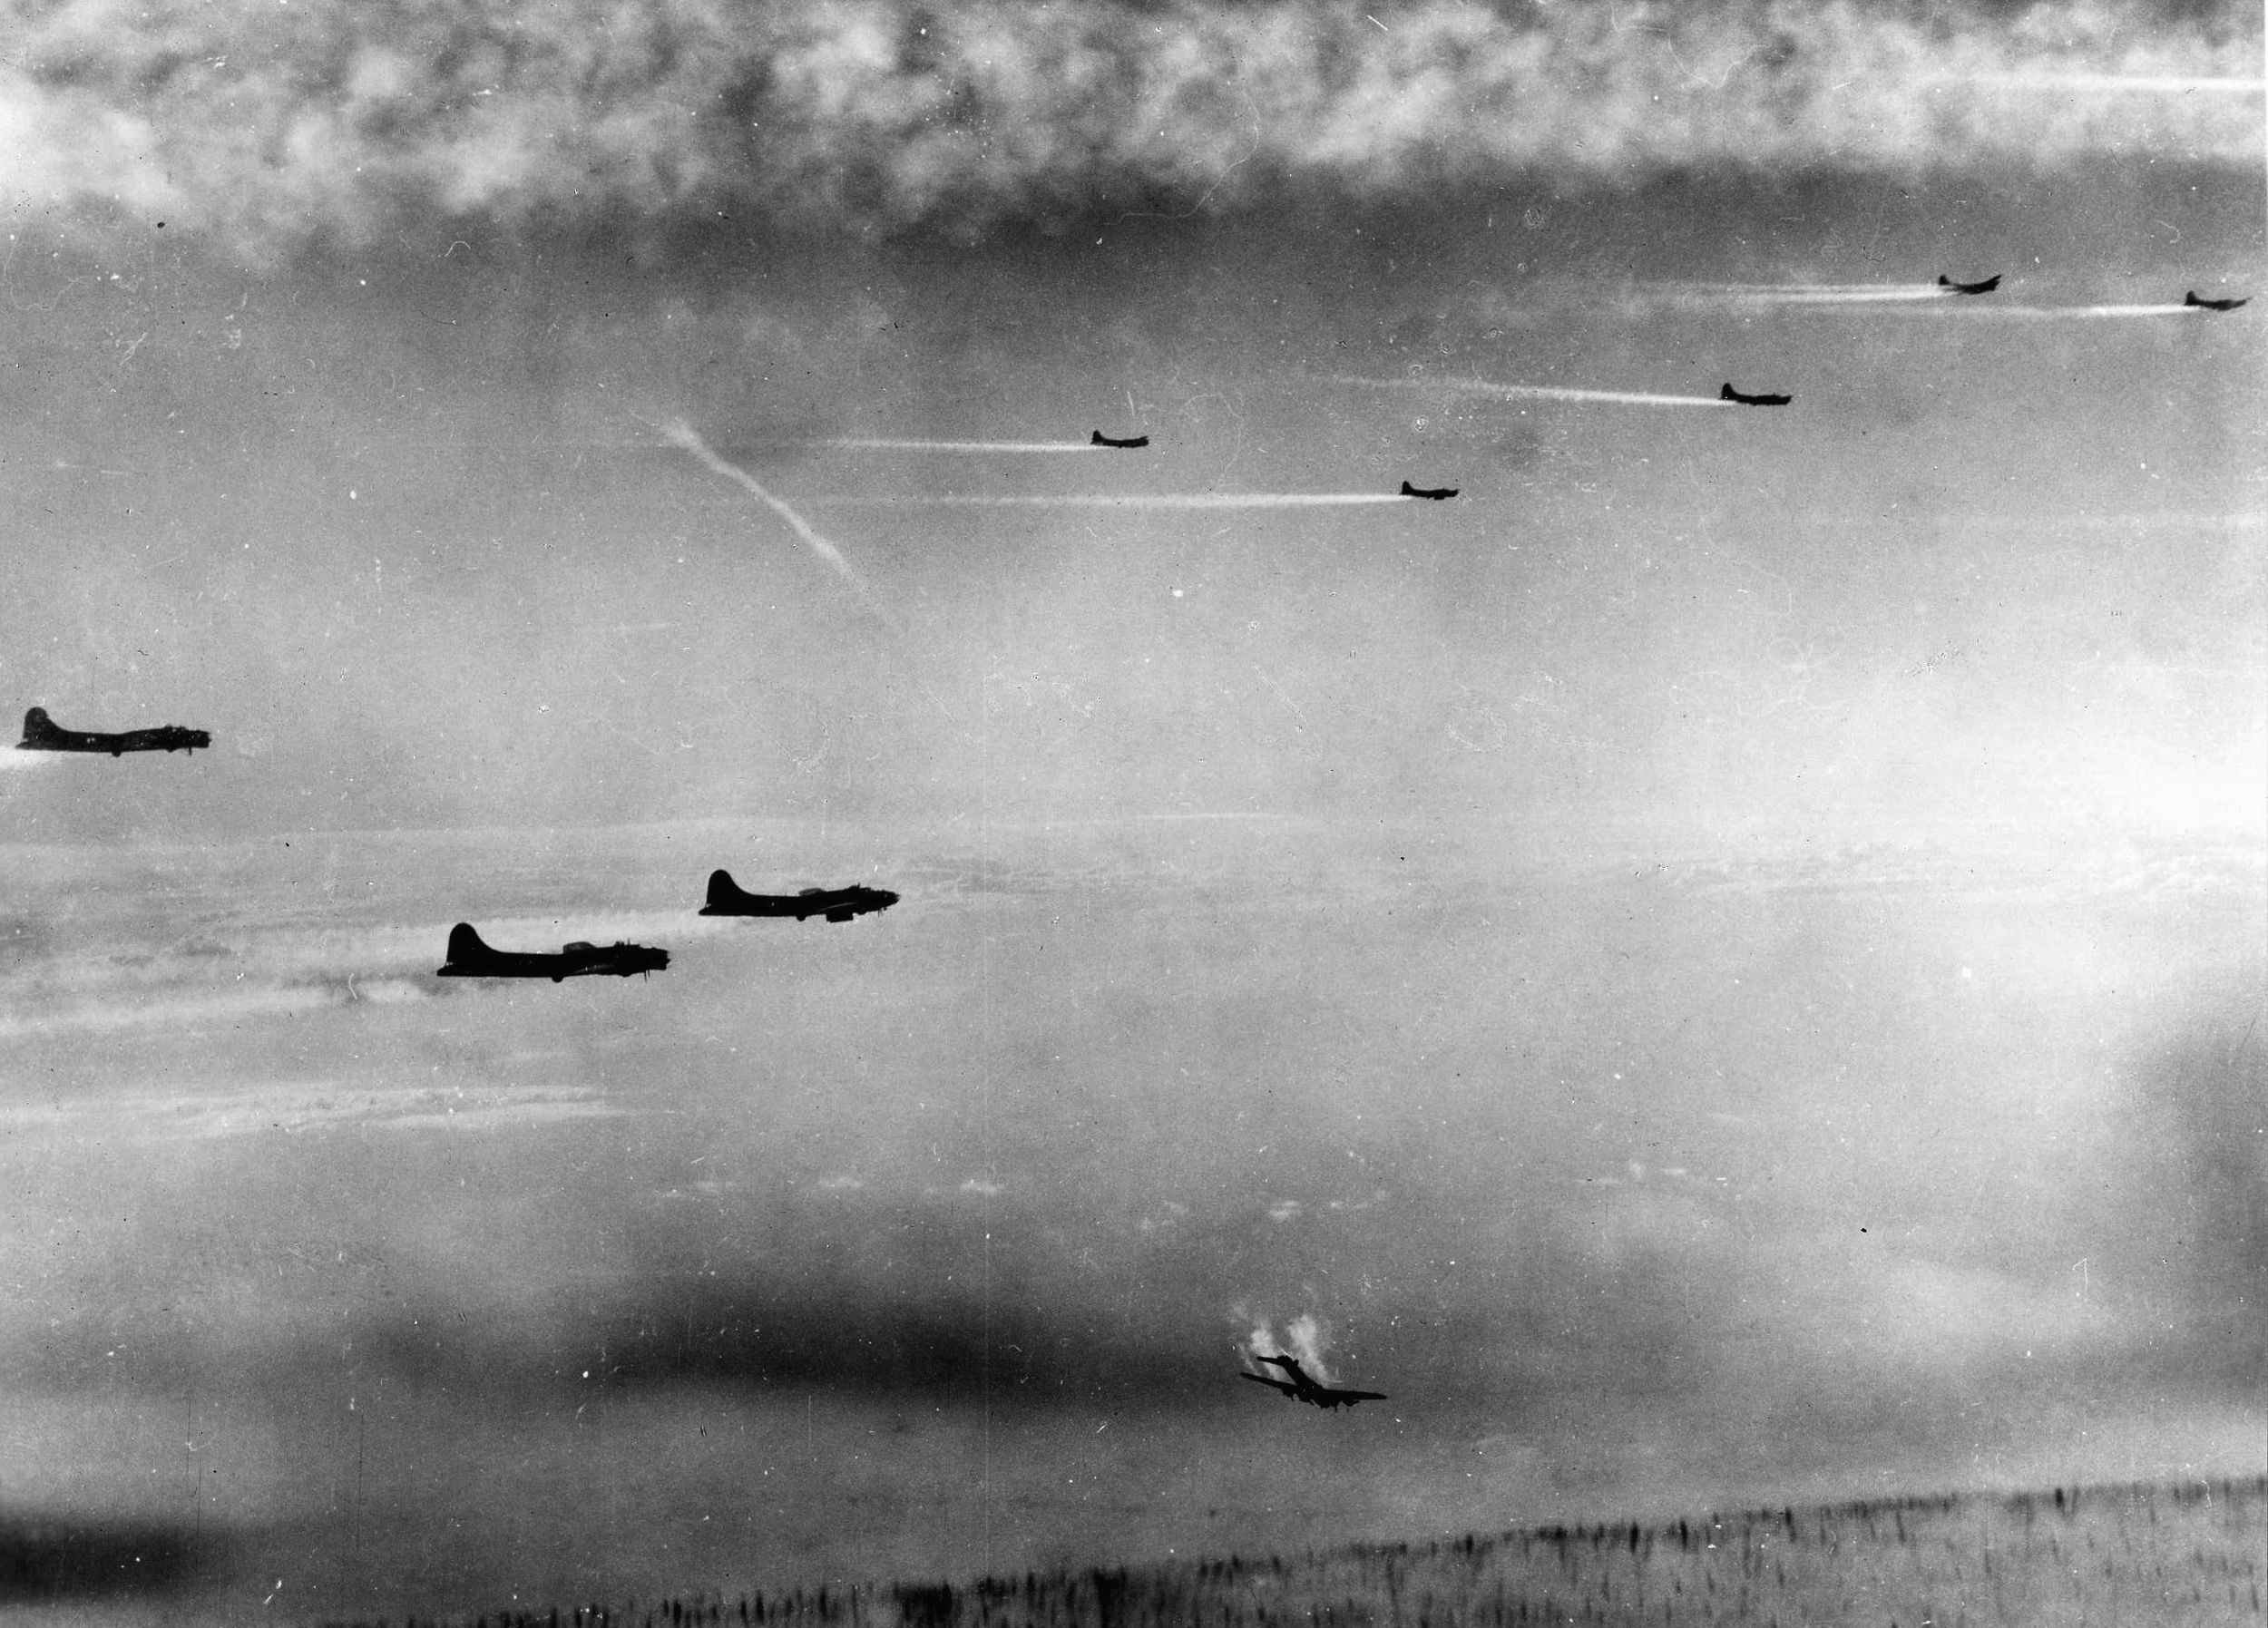 A photographer of the Eighth Air Force captured this haunting image of a B-17 streaking earthward as smoke streams from its engines while the remaining bombers in the frame continue toward their target, the city of Bremen. The tail assembly of the stricken B-17 has apparently been shot away. (National Archives)